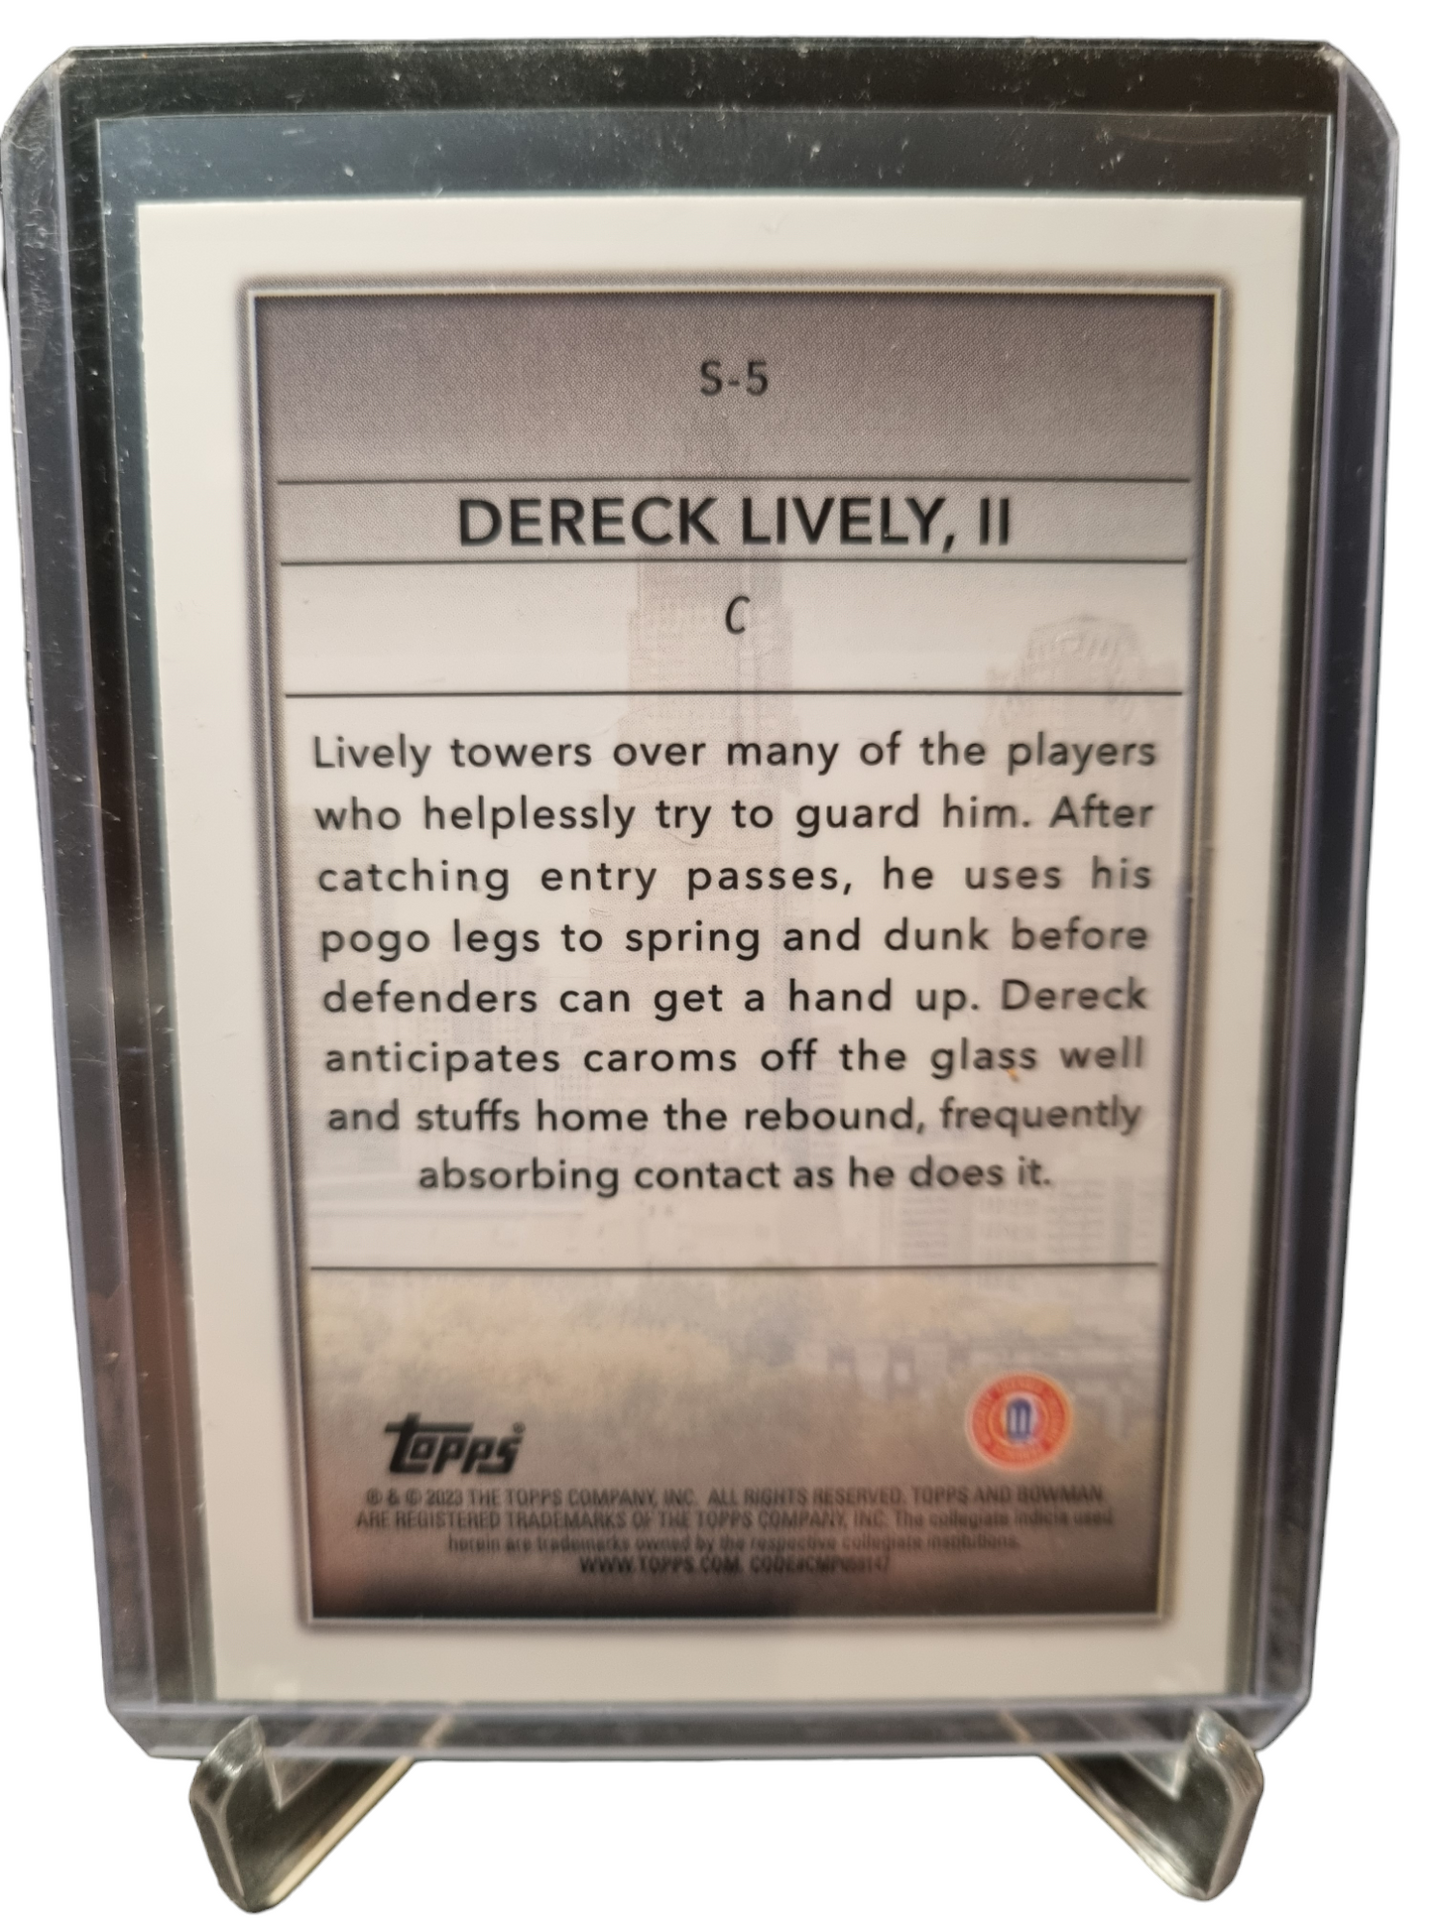 2023-24 Topps Chrome Bowman U #S-5 Dereck Lively II Rookie Card Silver Skyscraping